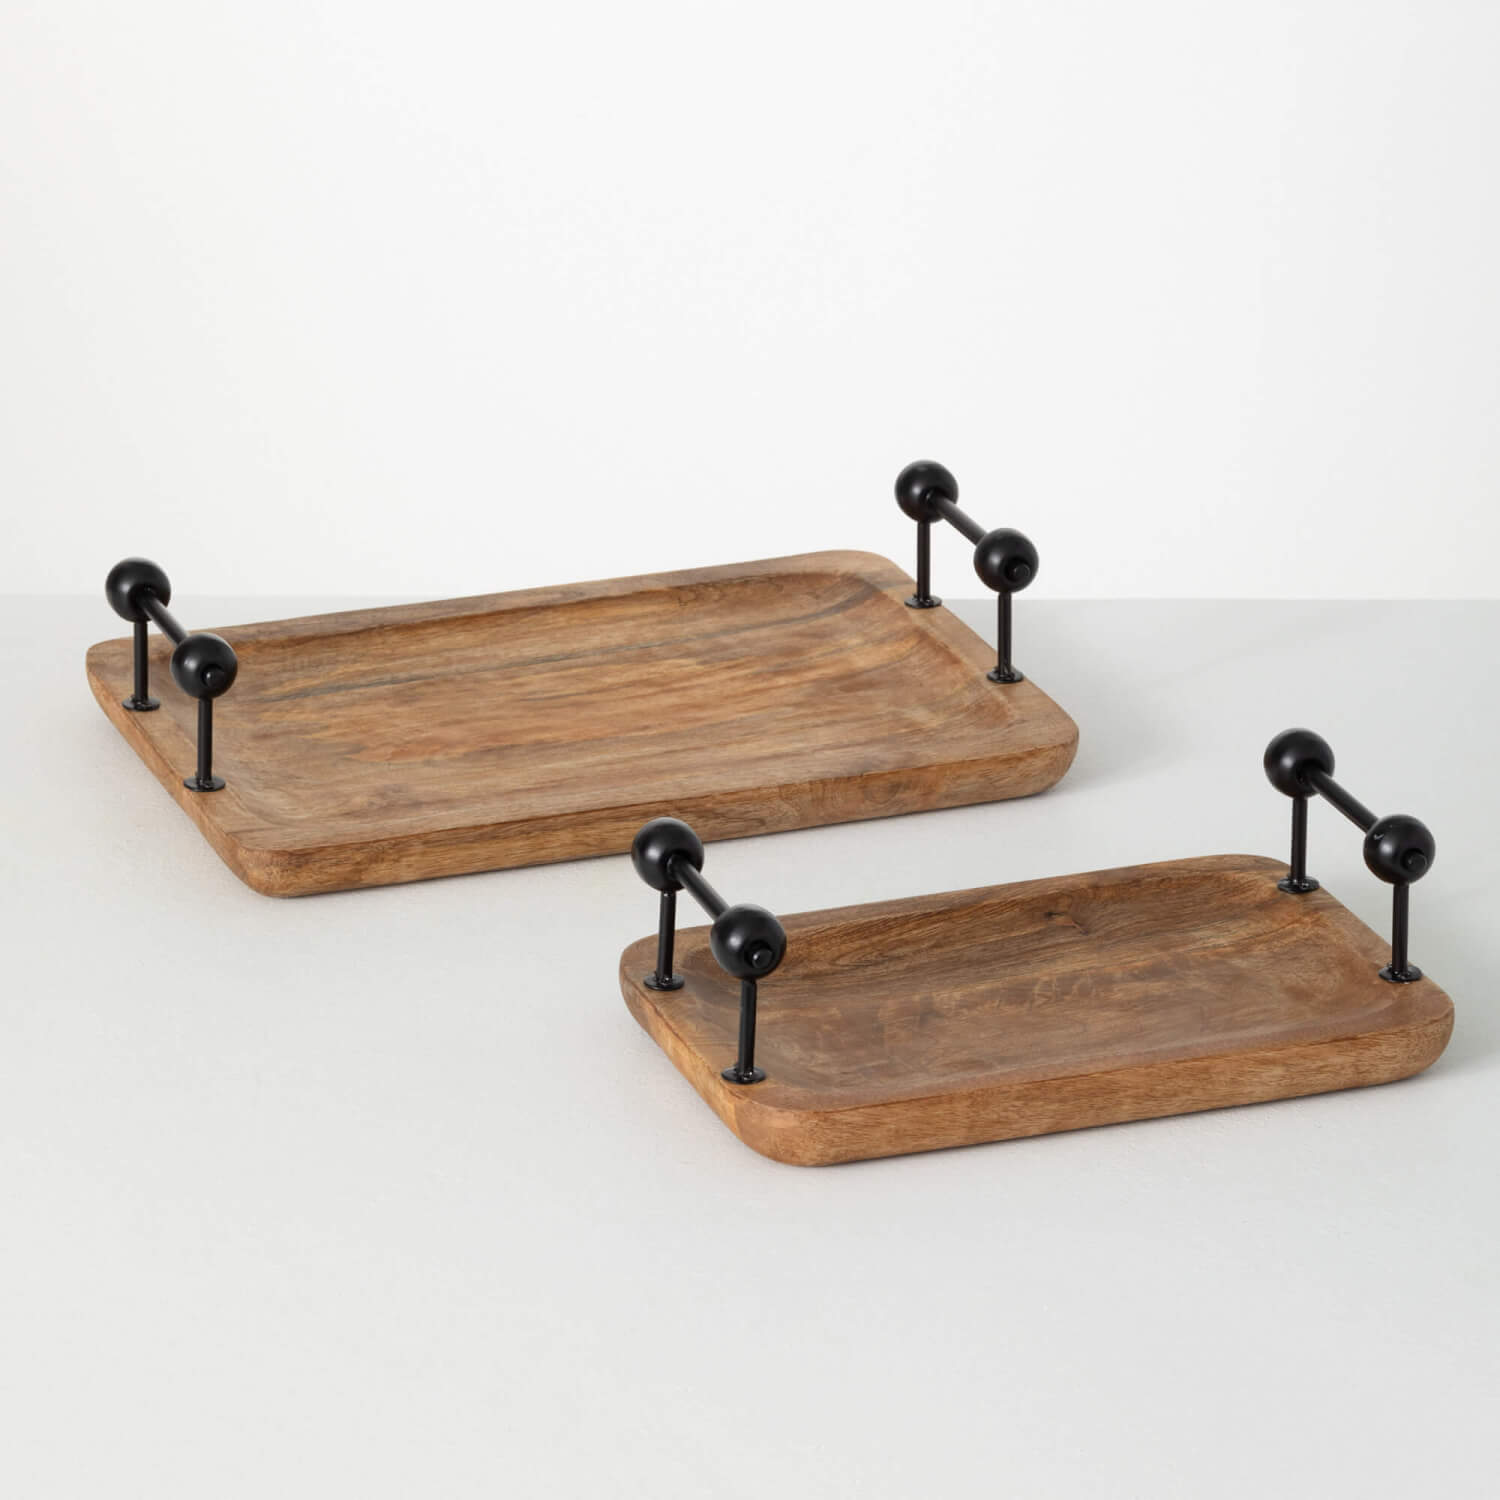 Wooden Tray Set With Handles Elevate Home Decor - Trays